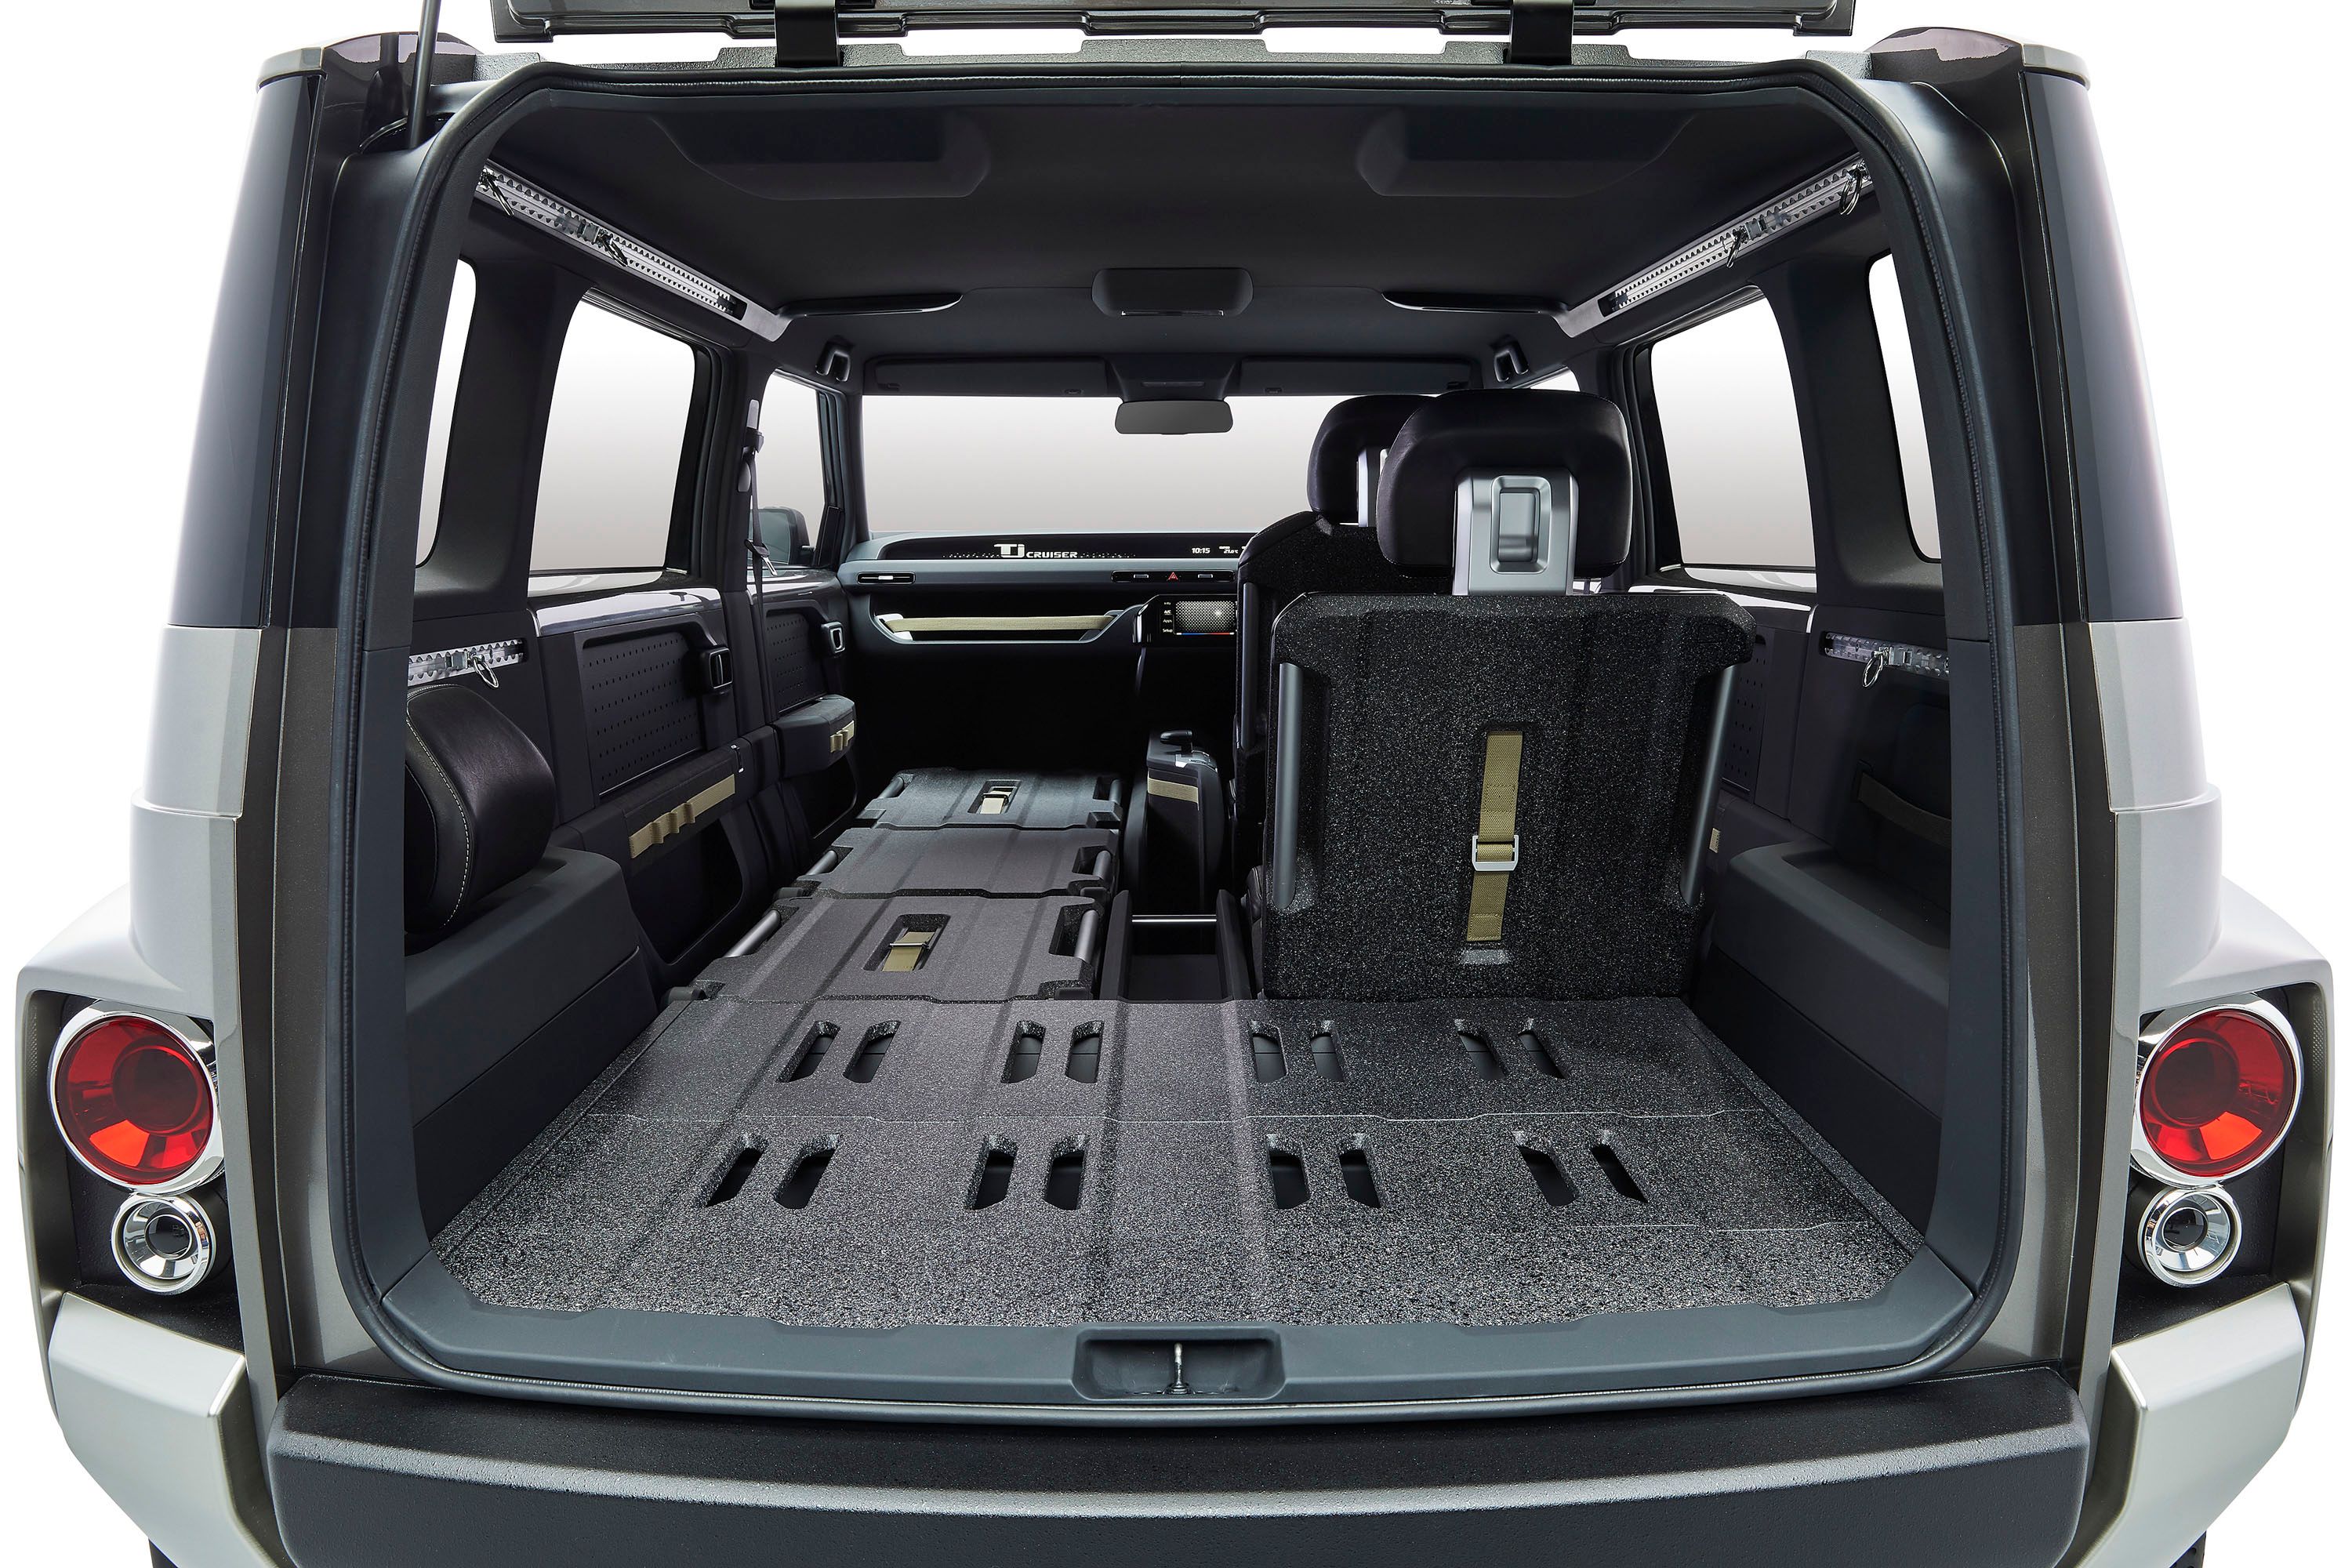  The seats all lay flat for maximum cargo room when needed